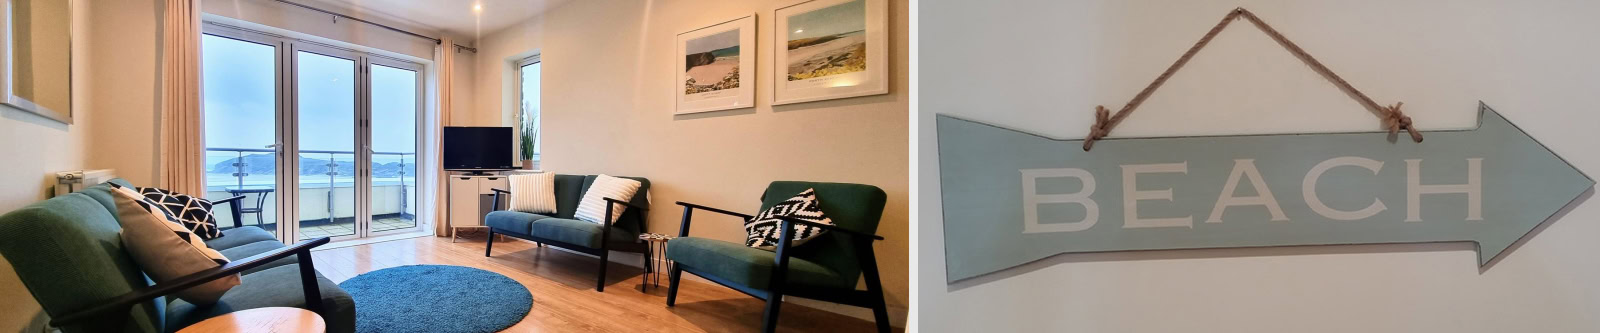 Living room and beach sign